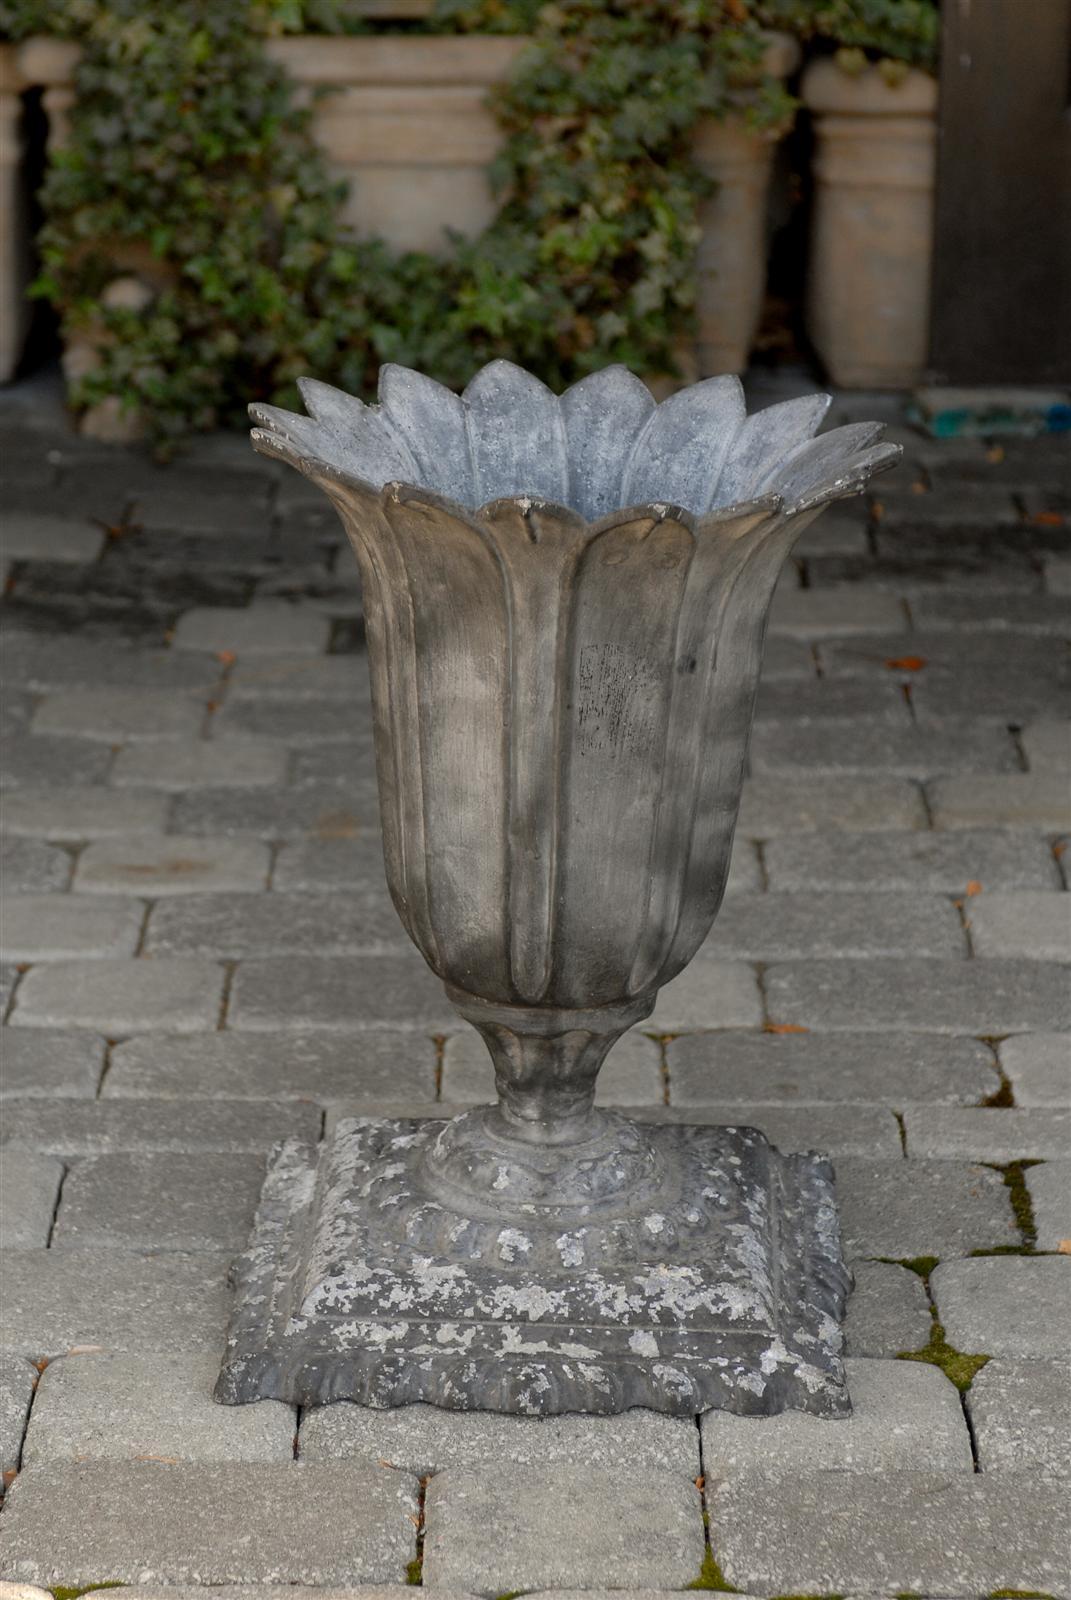 A French zinc planter from the early 20th century. This zinc planter resembles the shape of a flower with petals opening towards the sky, possibly like a cactus flower, which are common in Southern France. Narrowing at the base of the flower, the